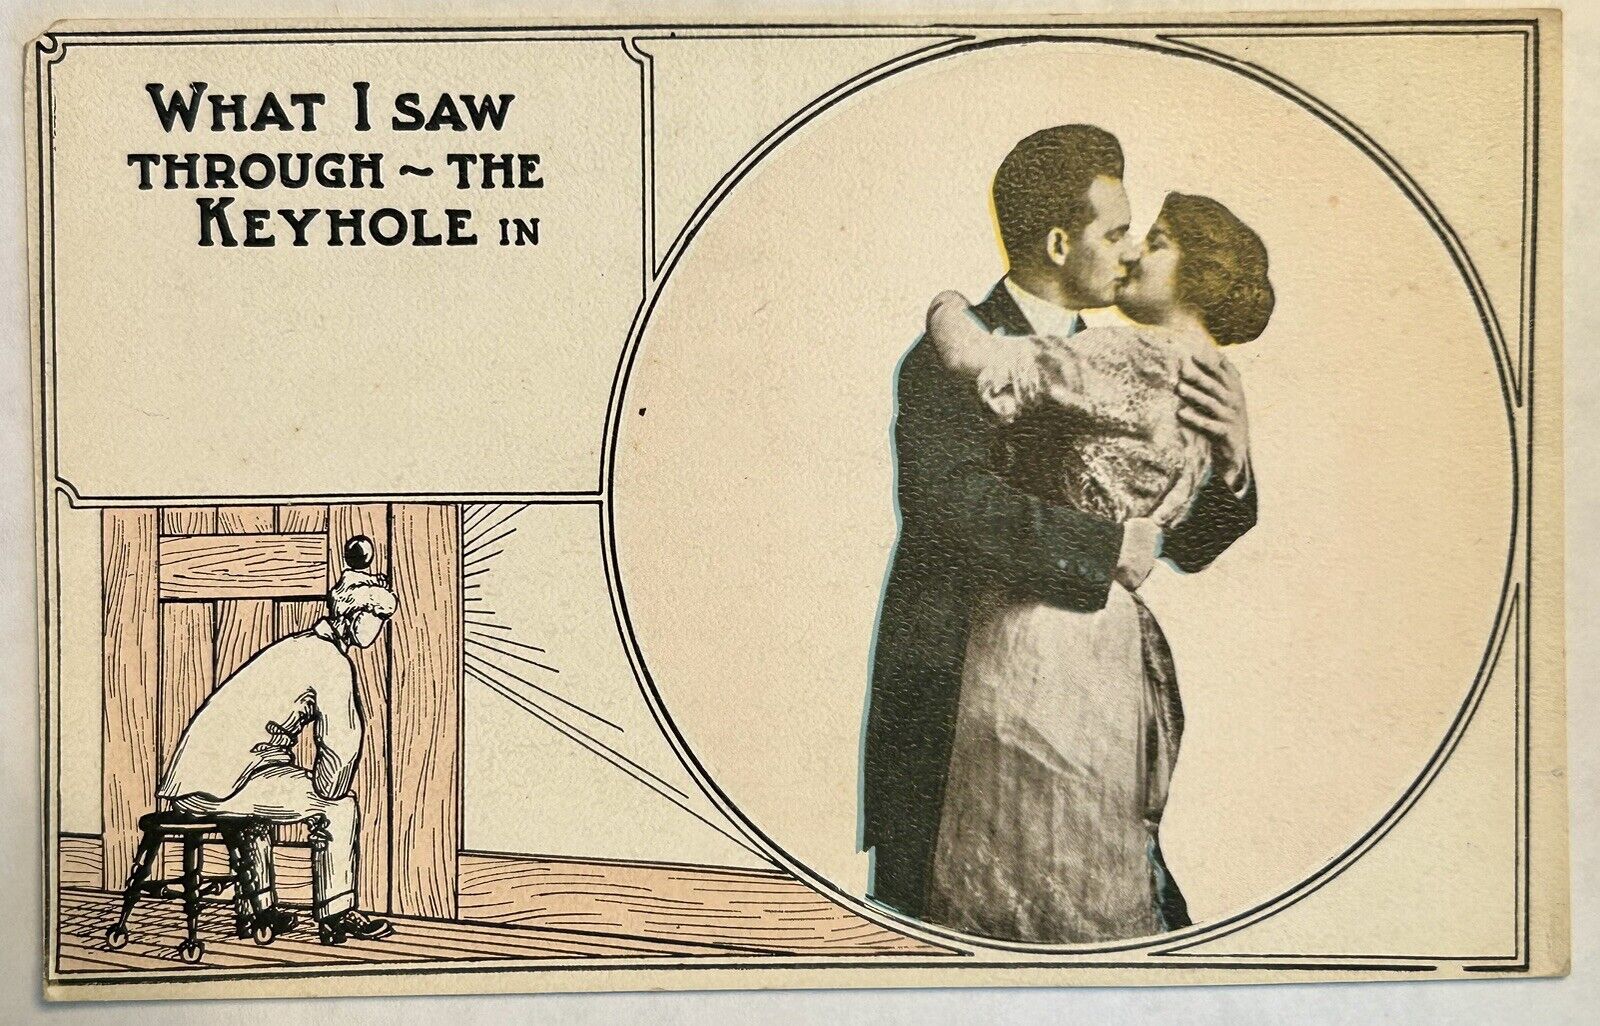 WHAT I SAW THROUGH ~ THE KEYHOLE. Vintage love and romance postcard early 1900s.